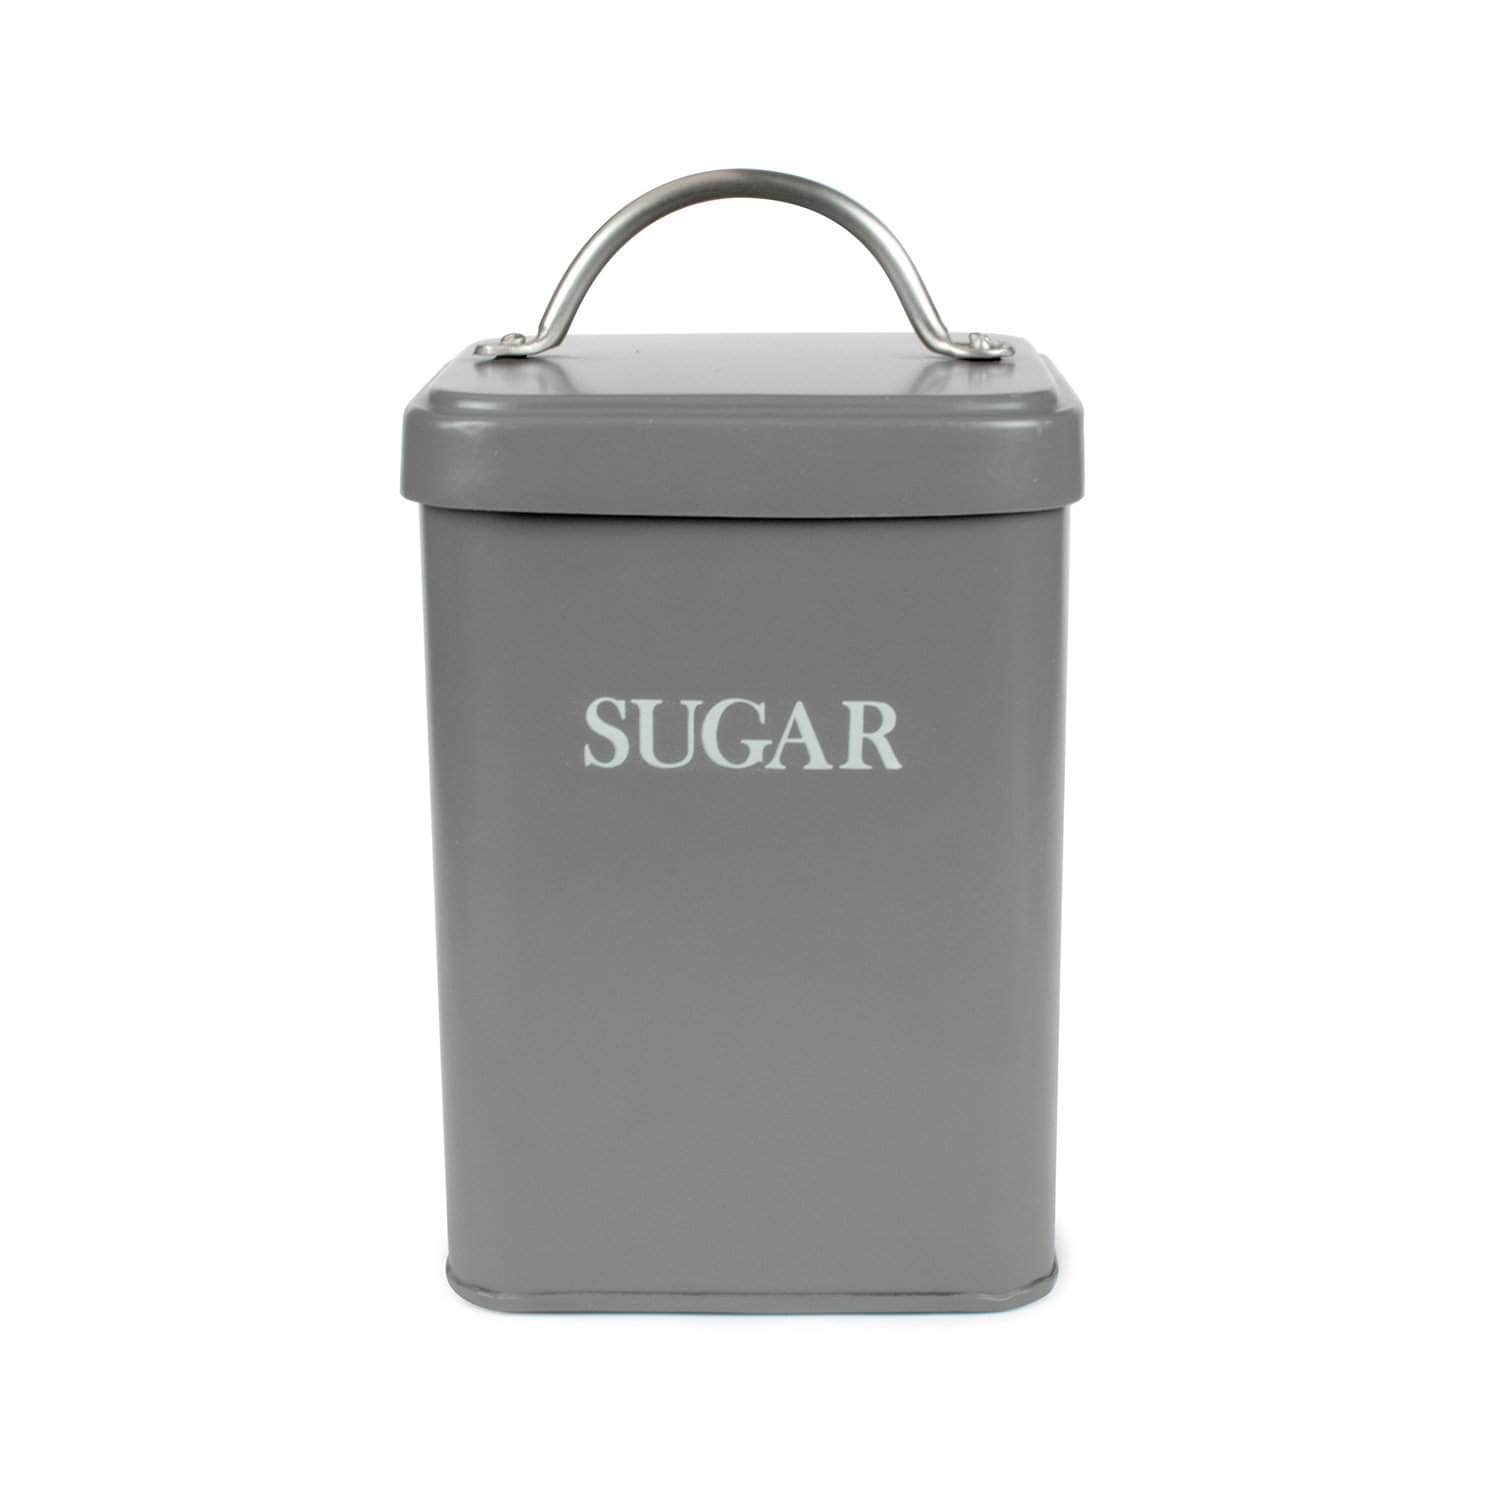 Sugar canister in charcoal